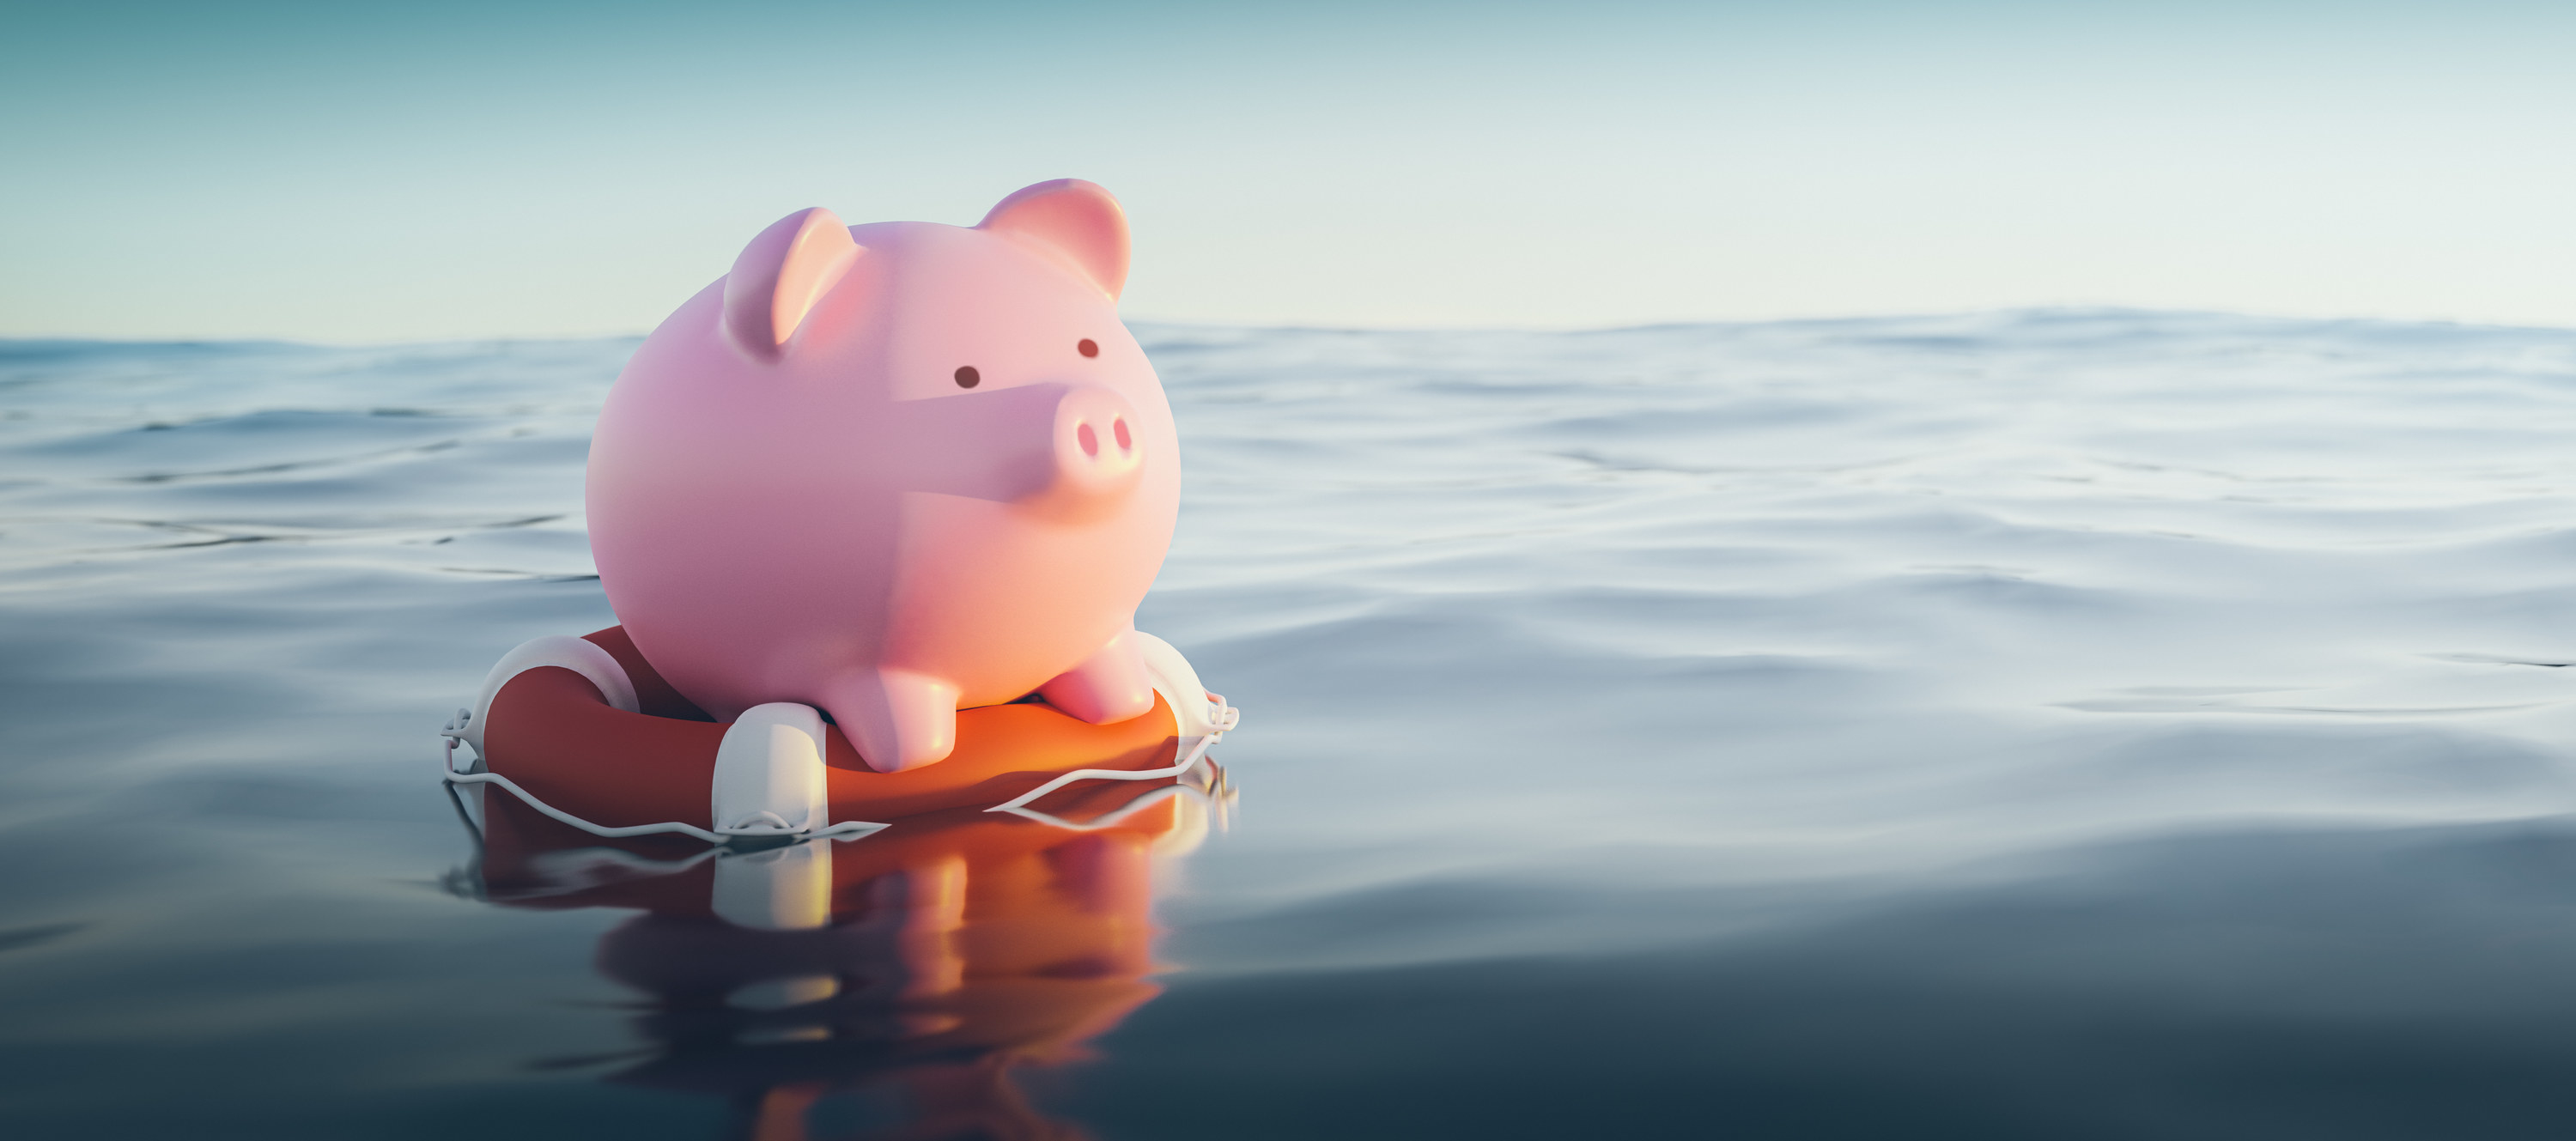 piggy bank floating in the ocean on a life preserver